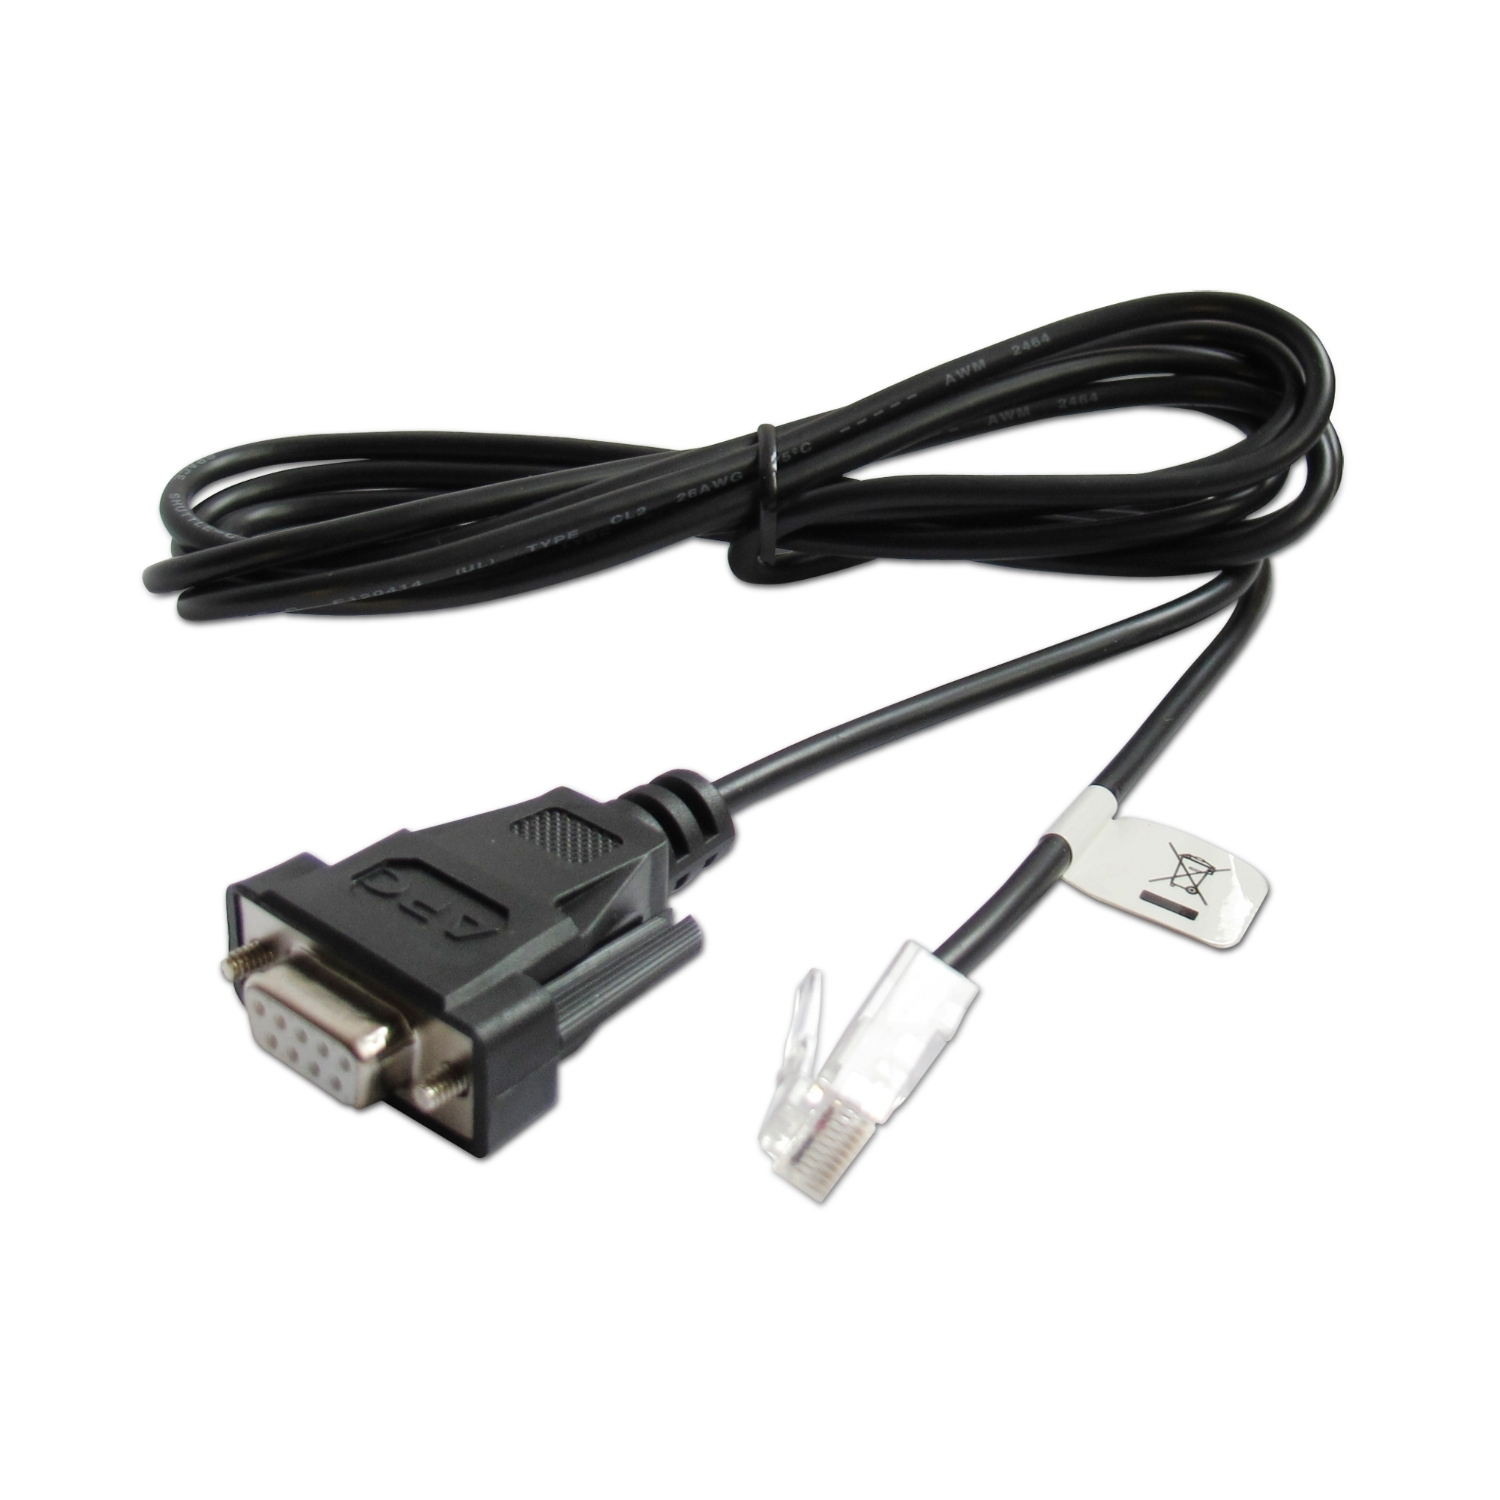 RJ45 serial cable for Smart-UPS LCD Models 2M